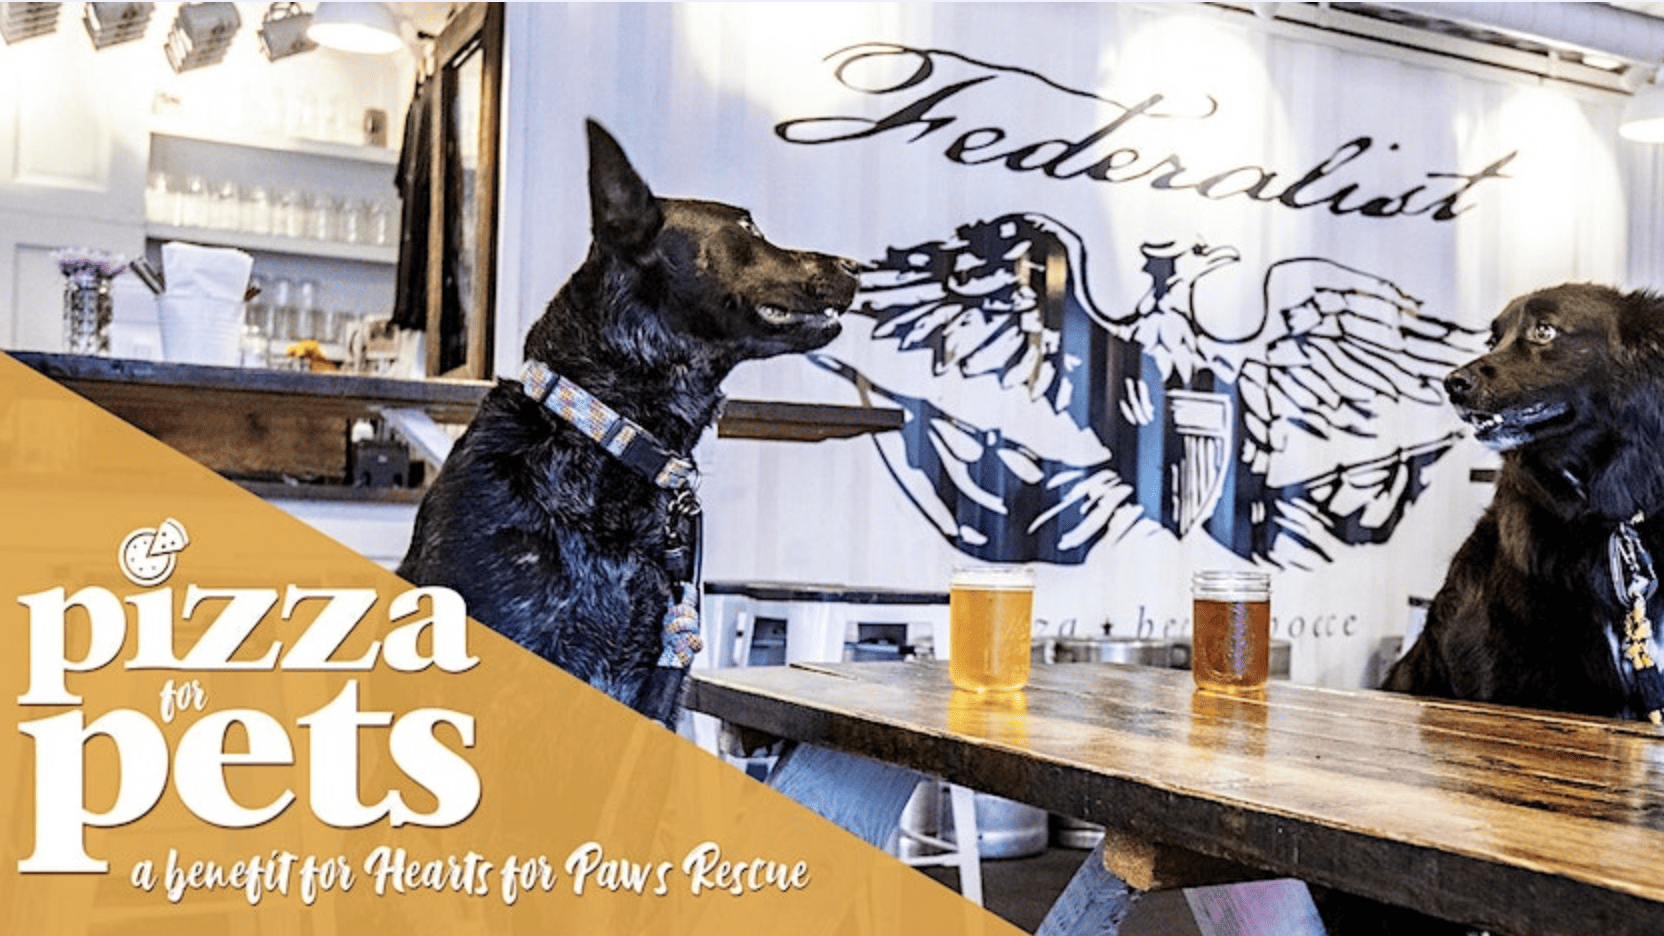 Pizzas for Pets: A Benefit for Hearts for Paws Rescue banner